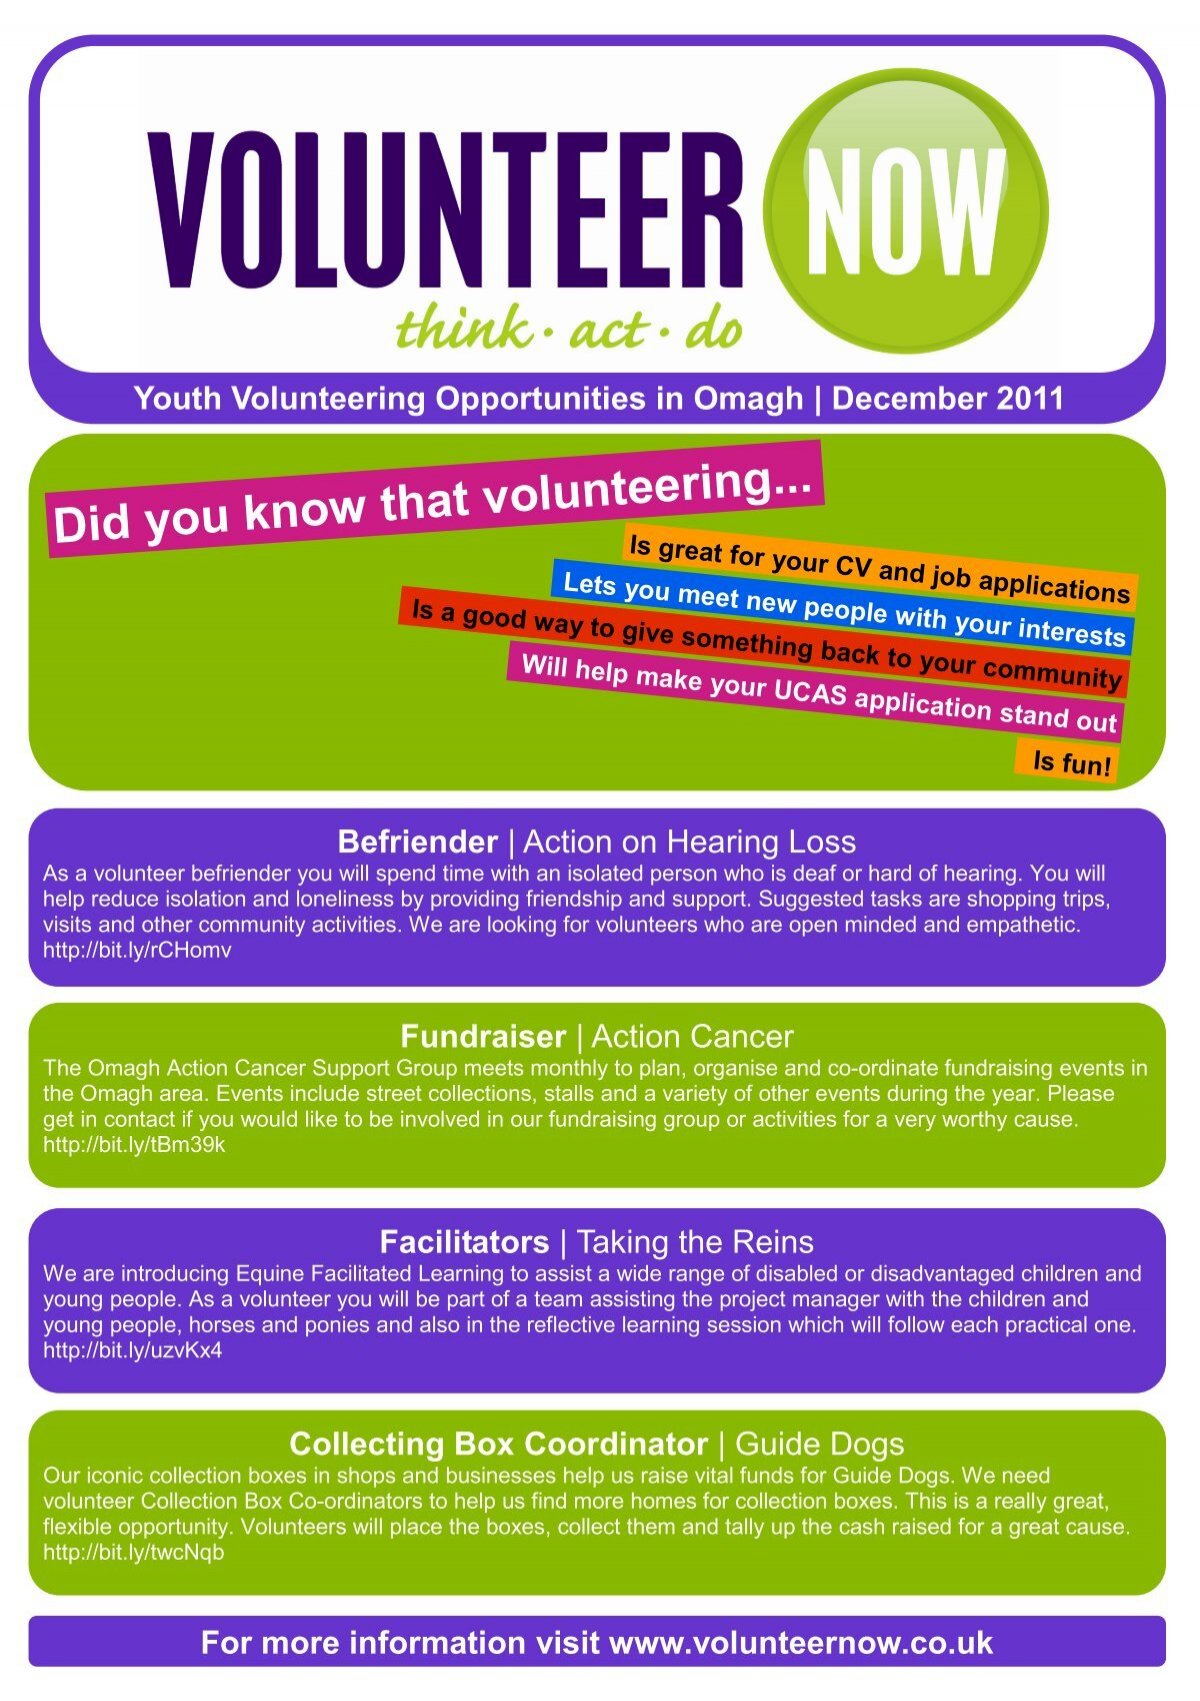 Volunteer Opportunities for Youth